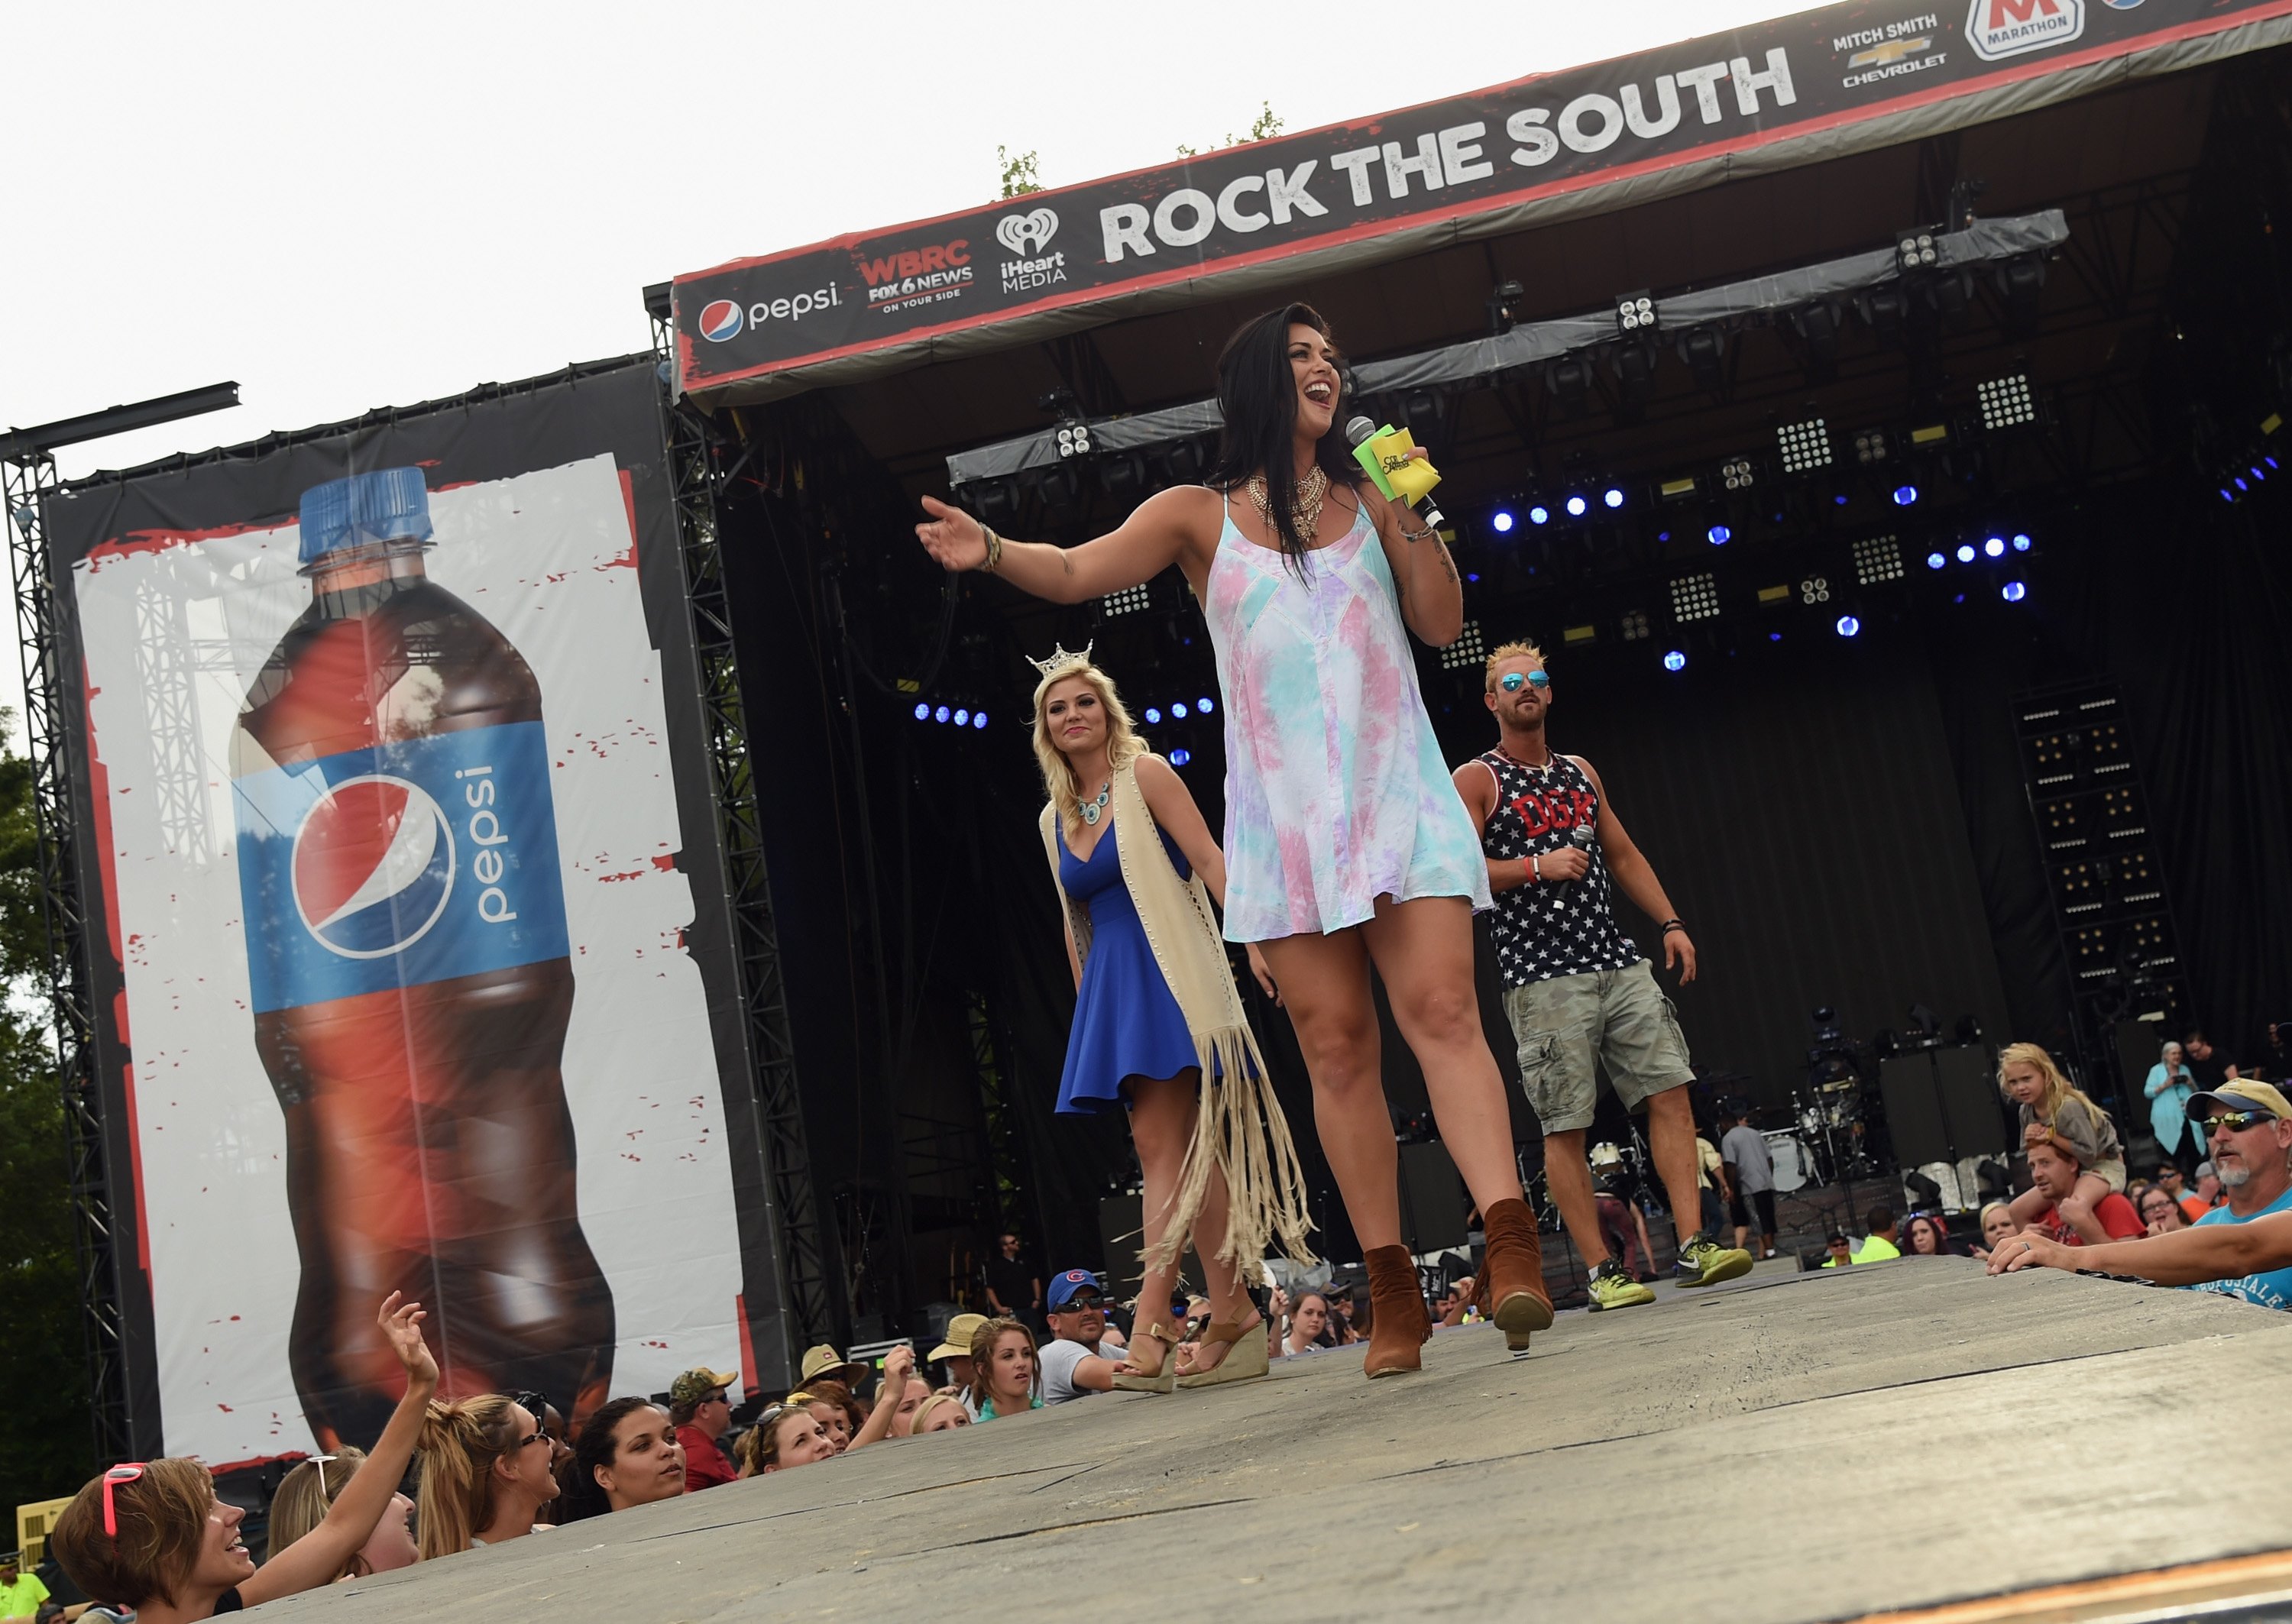 Miss Alabama 2015 Maggie McGuffin (Crown on Head) and CMT's Party Down South cast members Ryan "Daddy" Richards and Mattie Breaux attend Pepsi's Rock The South Festival - Day 2